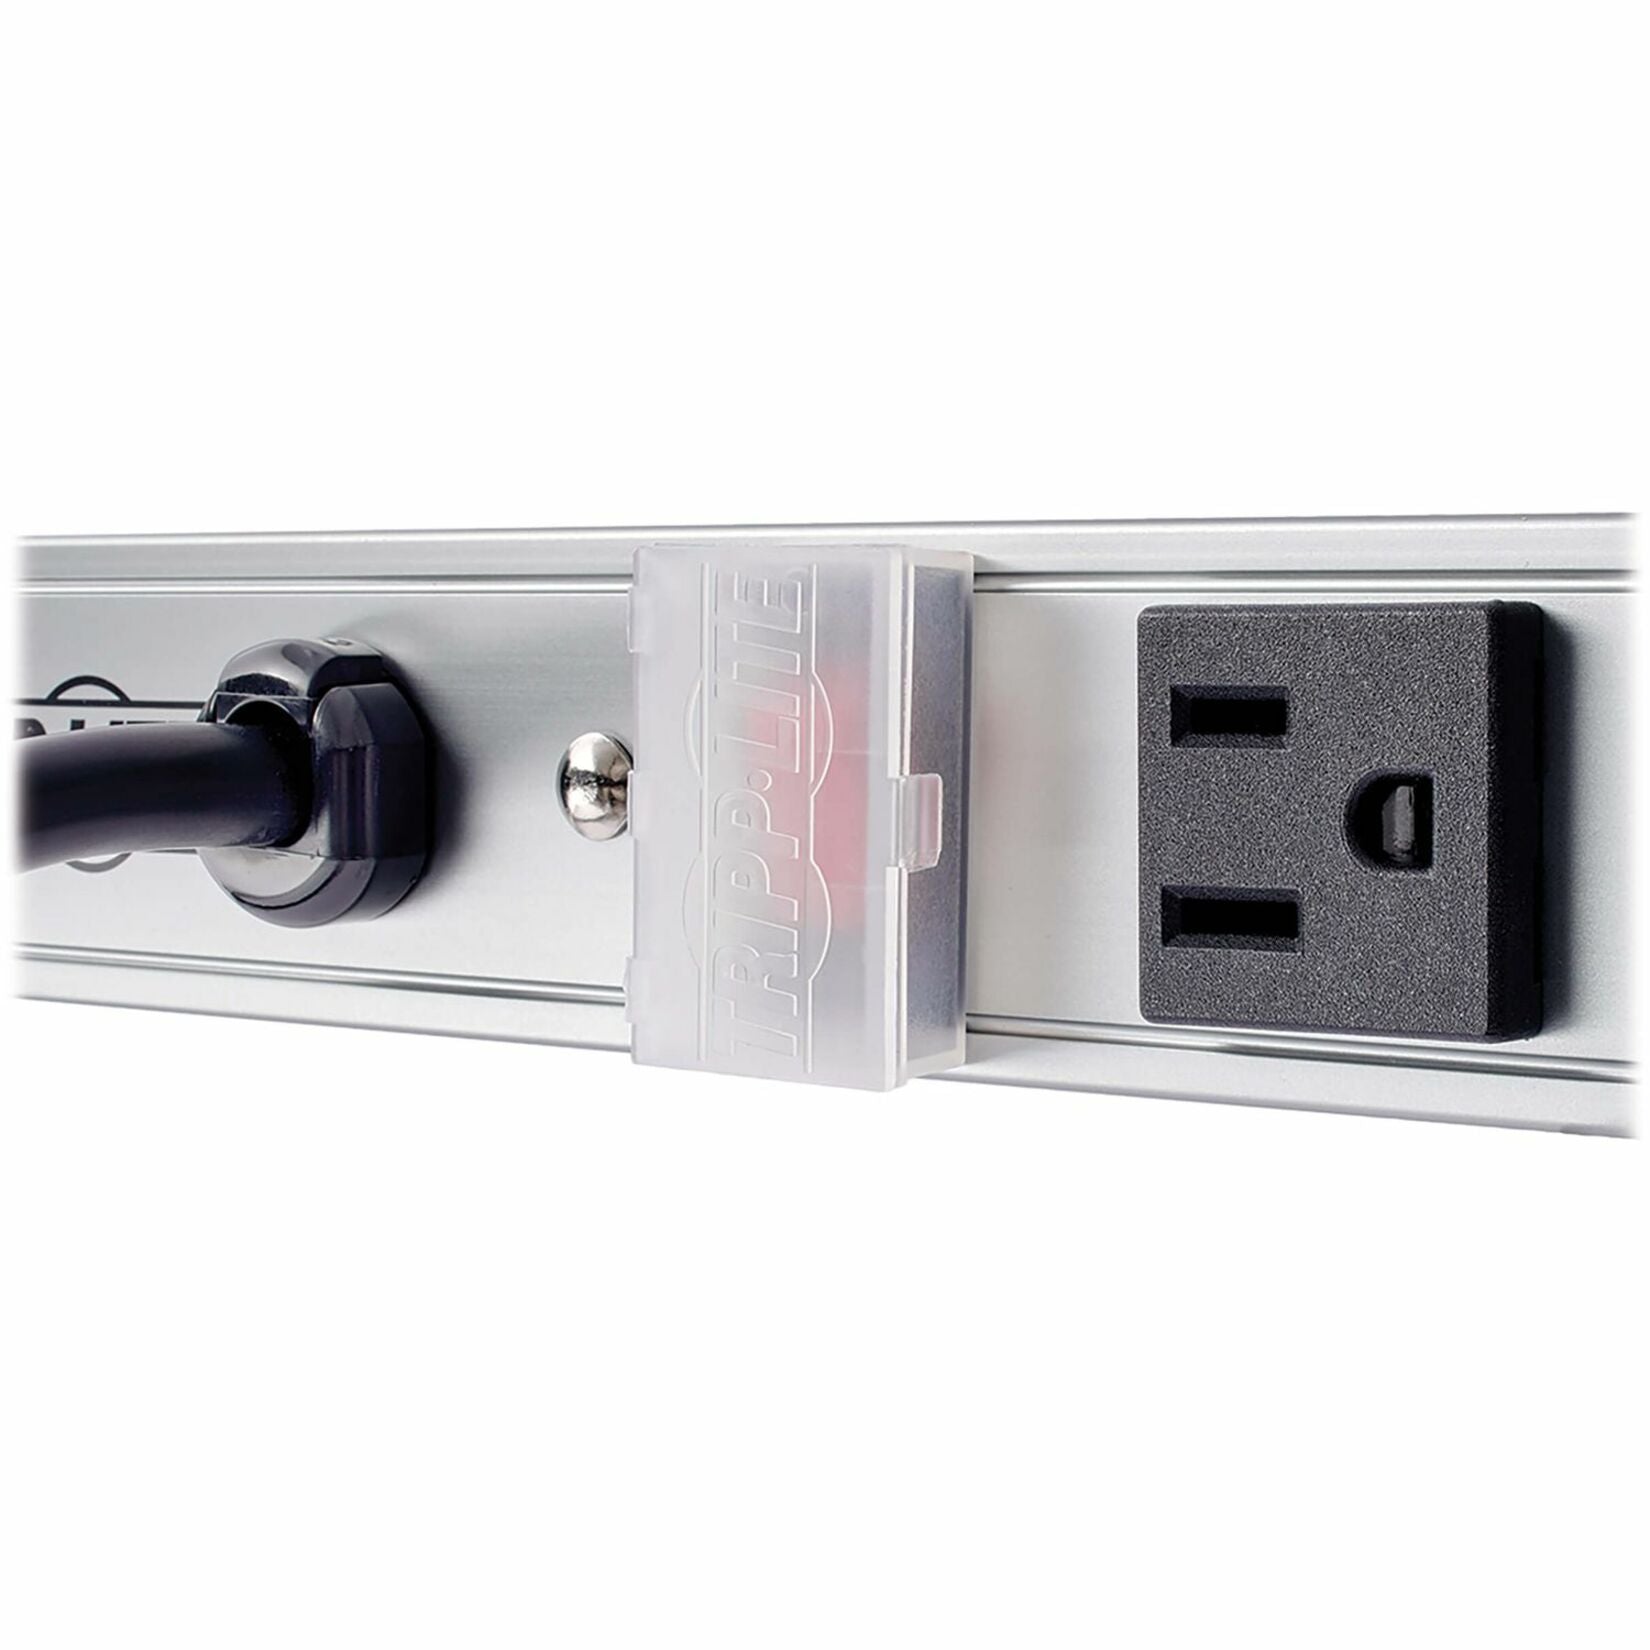 Tripp Lite PS7224-20T Power Strip 120V AC, 24 Outlet Strip, 20 Amp, 15ft Cord, 72in Length, Locking Plug